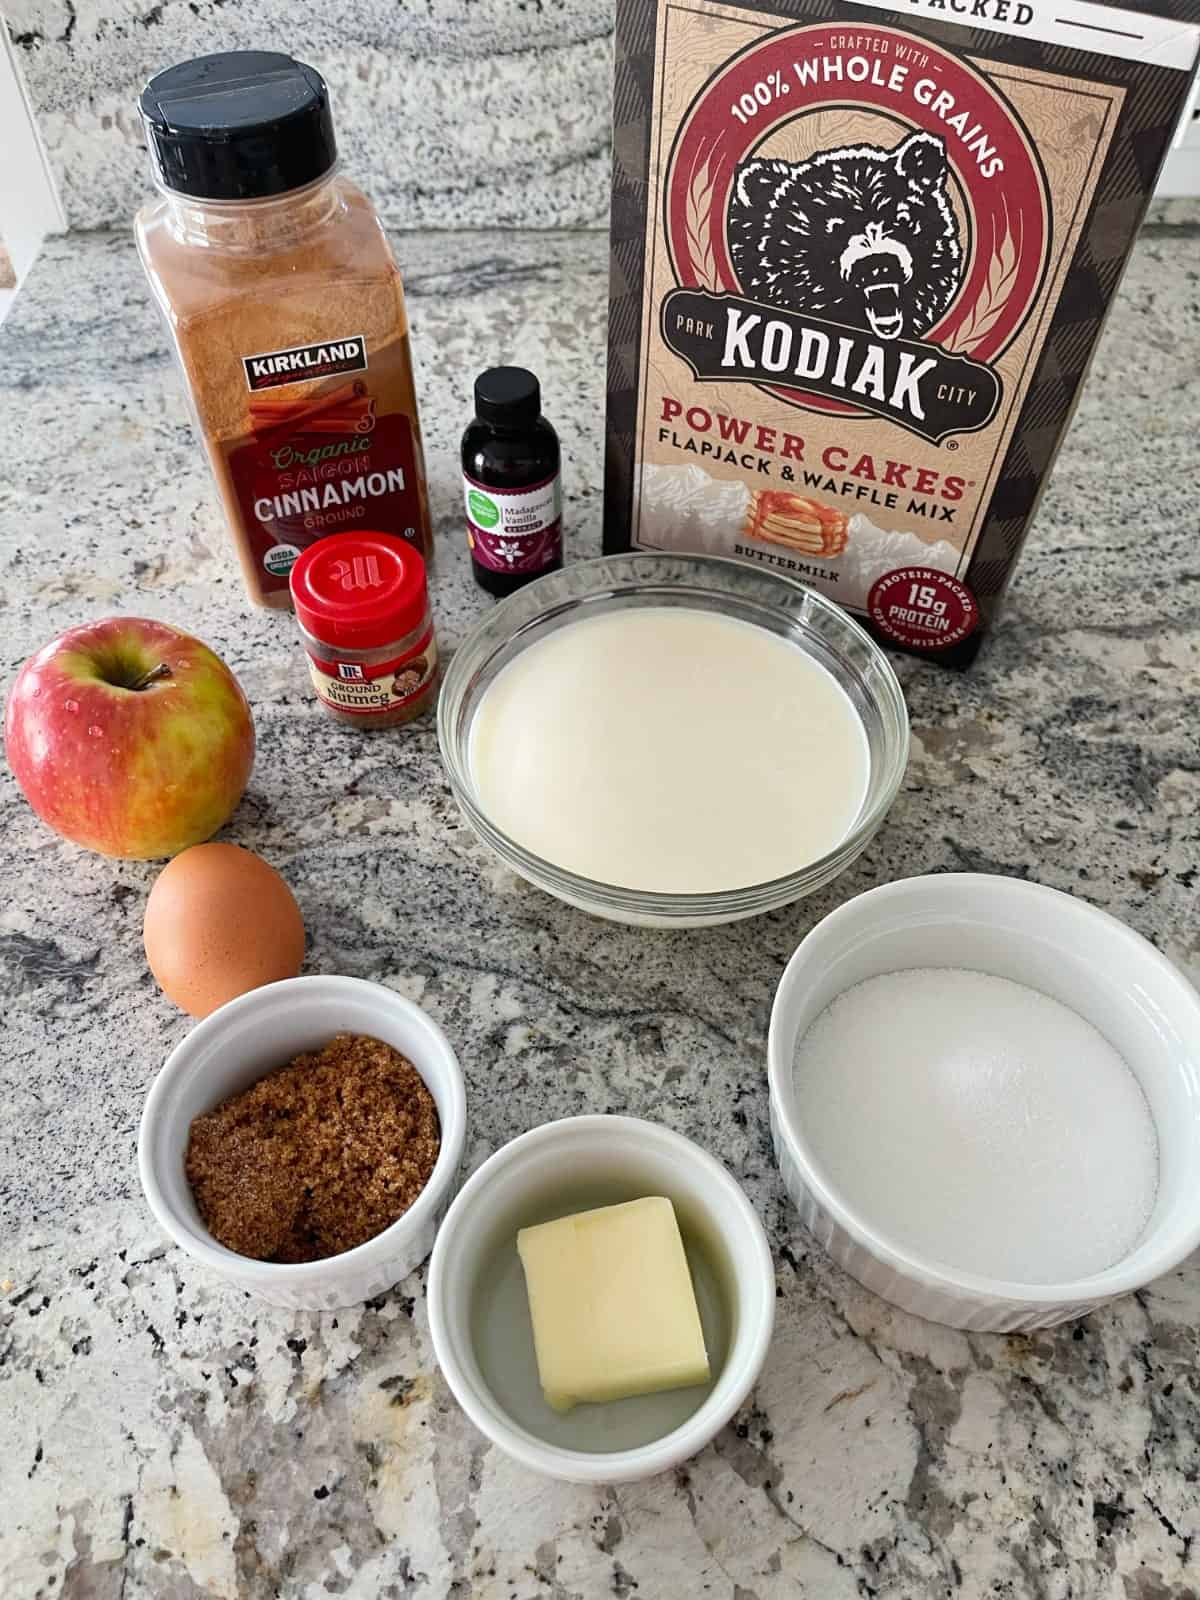 Ingredients including Kodiak Power Cakes flapjack and waffle mix, cinnamon, nutmeg, vanilla extract, apple, egg, butter, Truvia sweetener and butter on granite.